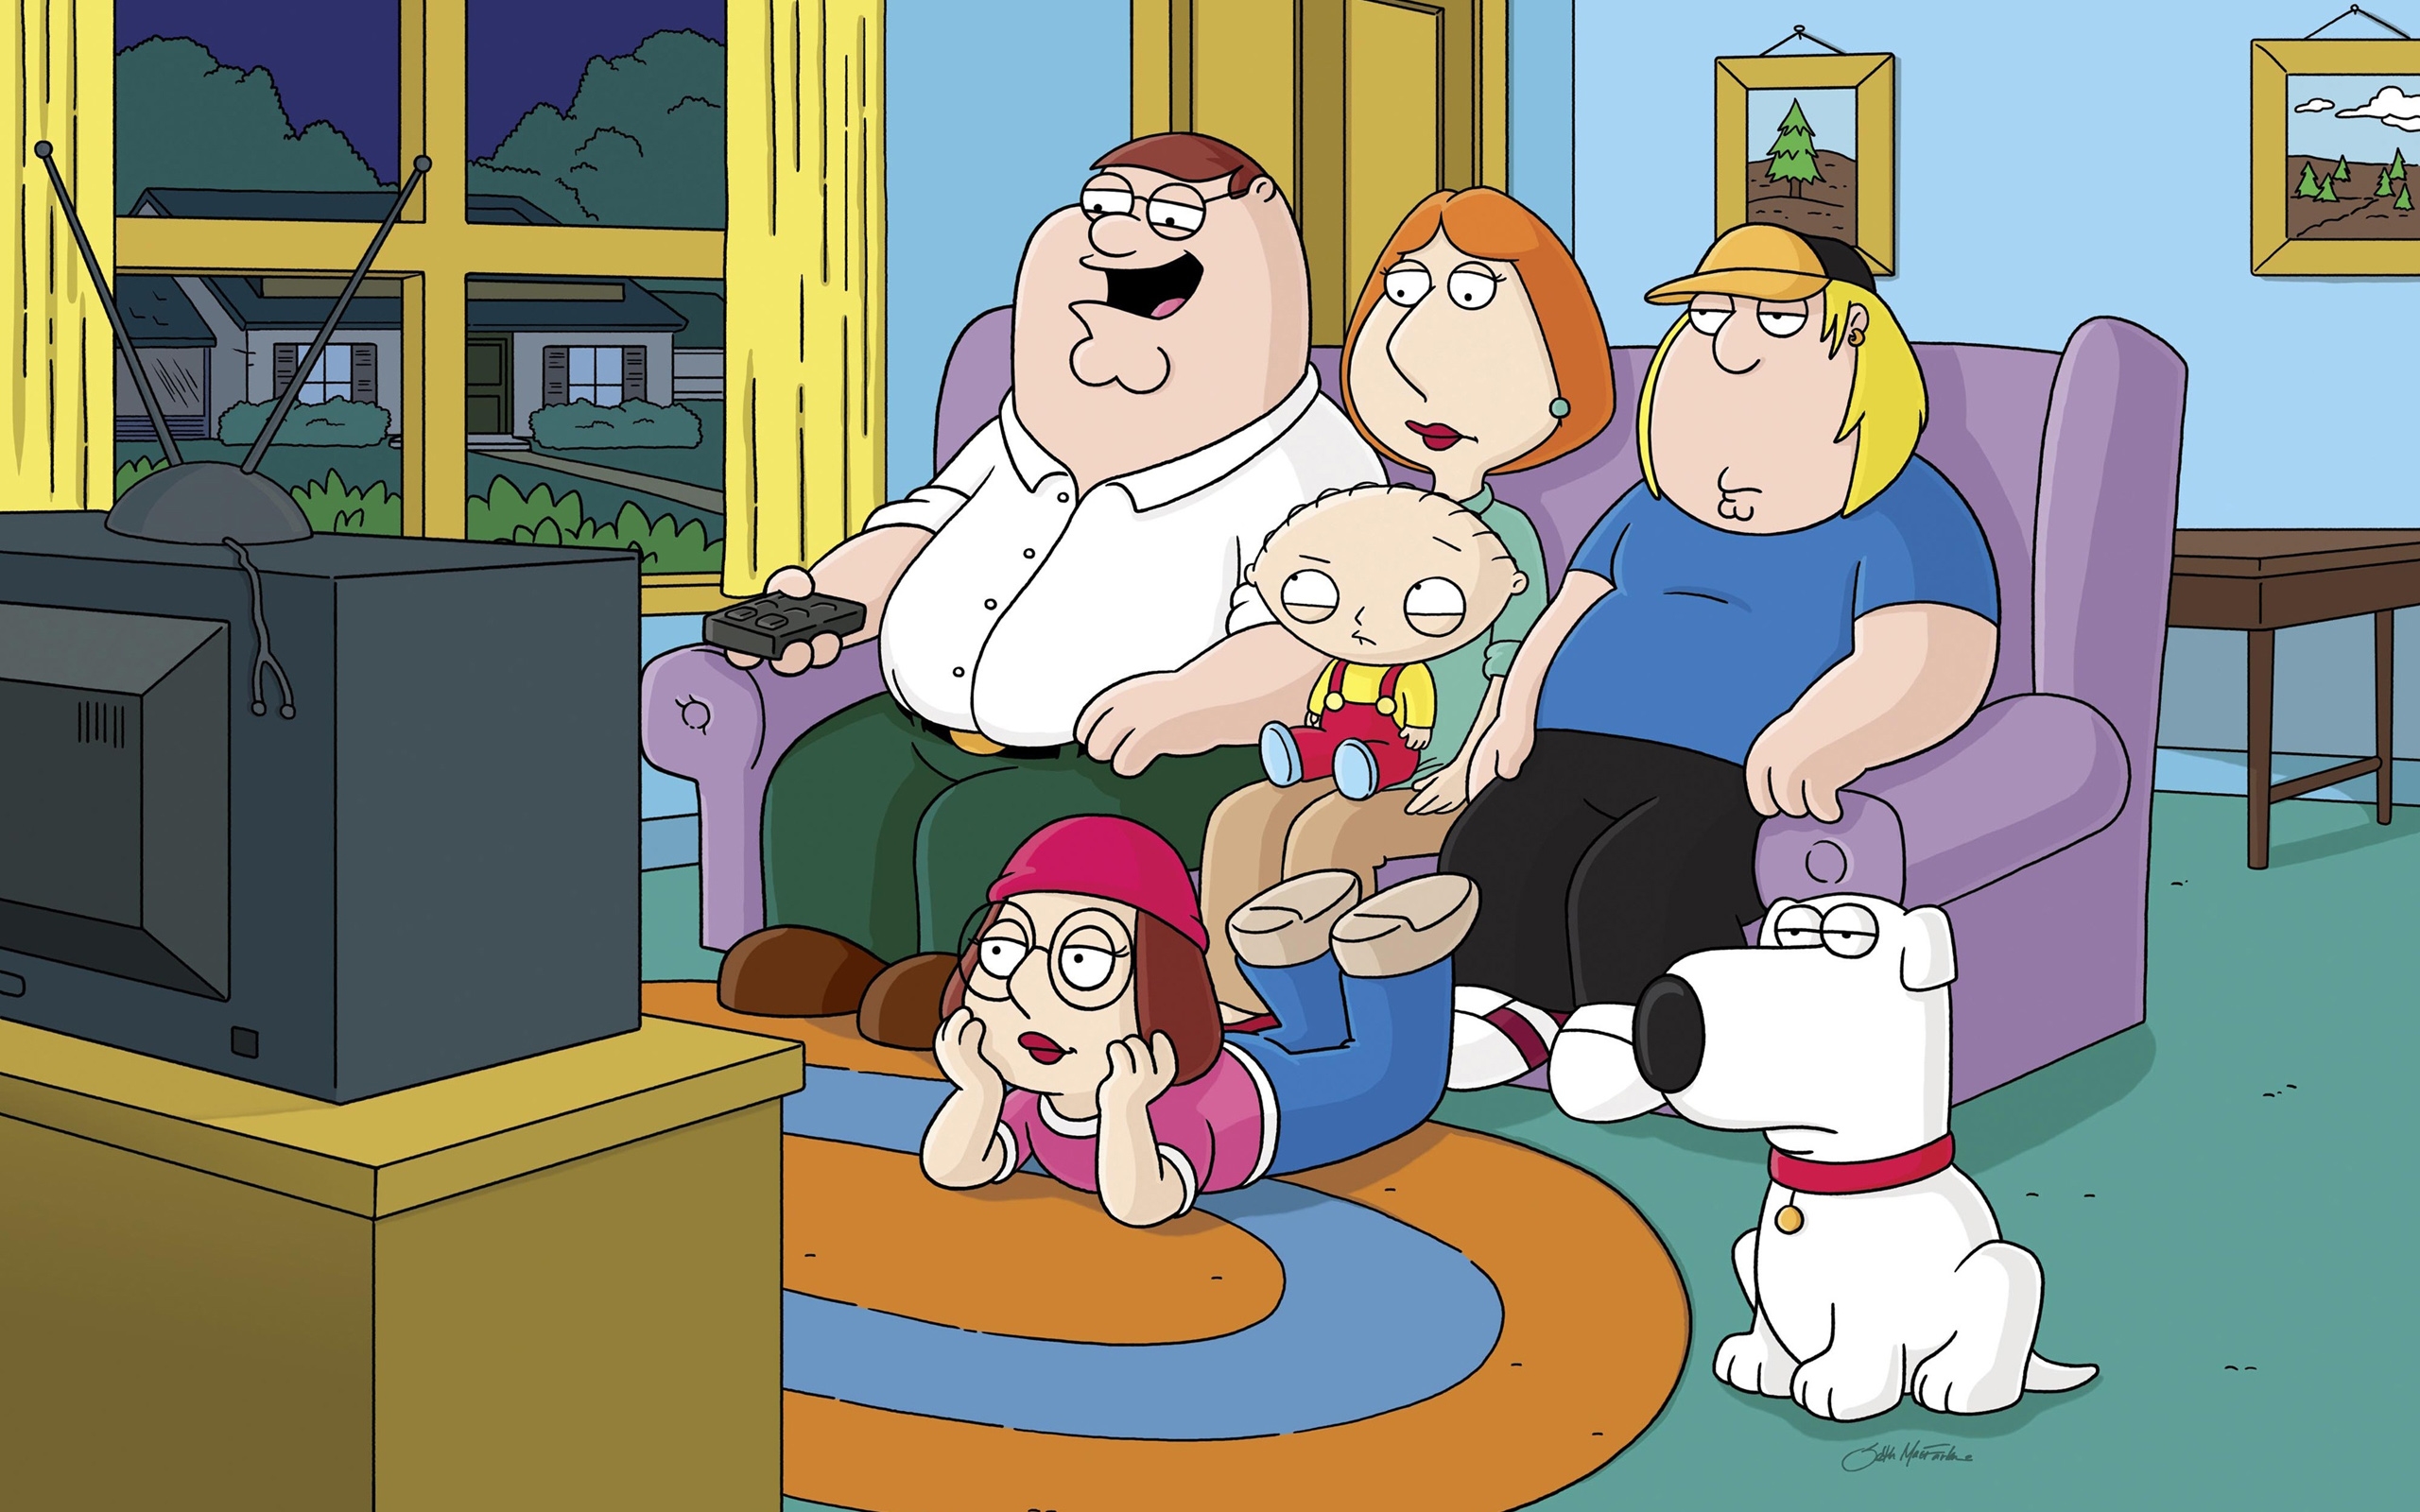 Family Guy characters Stewie, Brian, Peter, Lois, Chris, and Meg pose in a TV show-inspired desktop wallpaper.